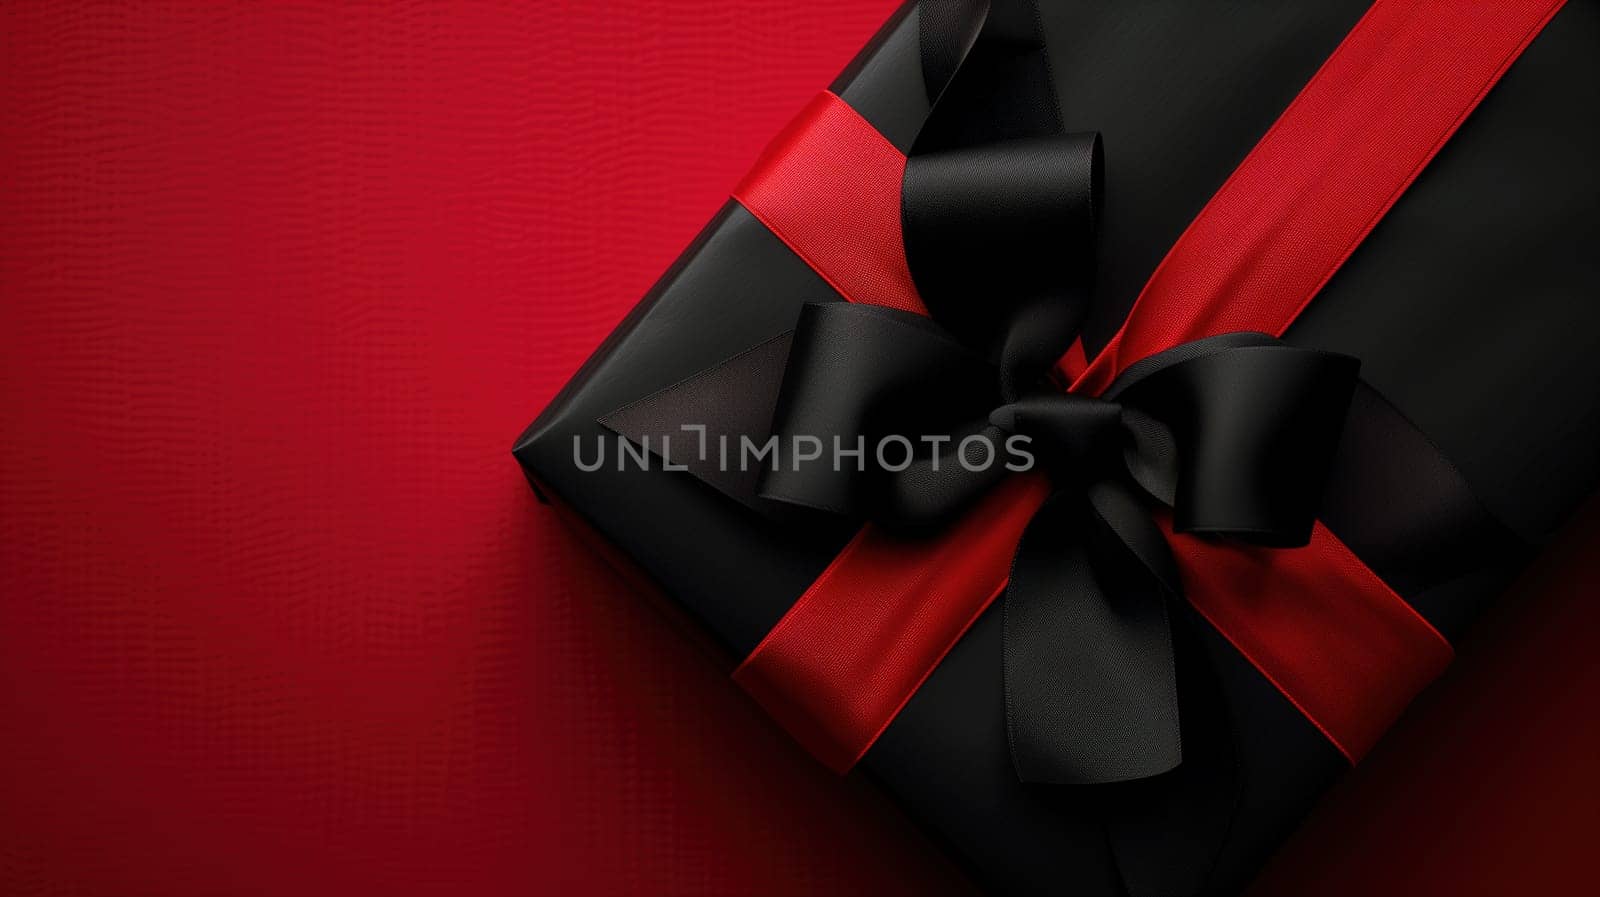 A black and red gift box adorned with a vibrant red ribbon, symbolizing a sale or Black Friday concept. The box stands out with its bold colors and elegant presentation.